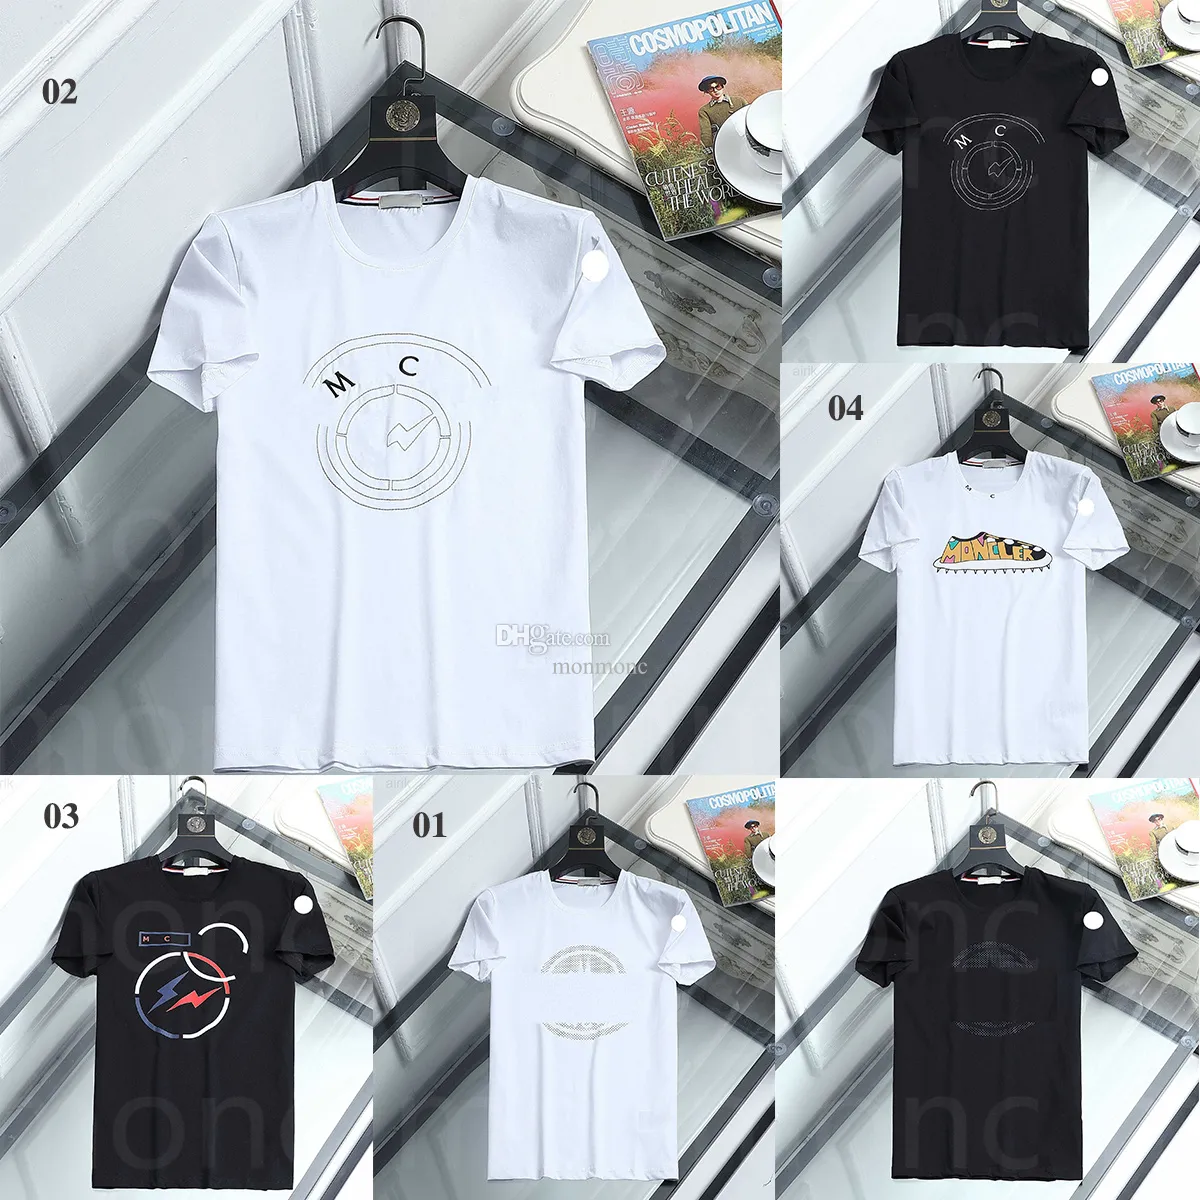 Classic Mens T-Shirts Designer Embroidered Casual Women t-shirts Fashion clothing Business short sleeve TEE Calssic tshirt Size M-XXXL